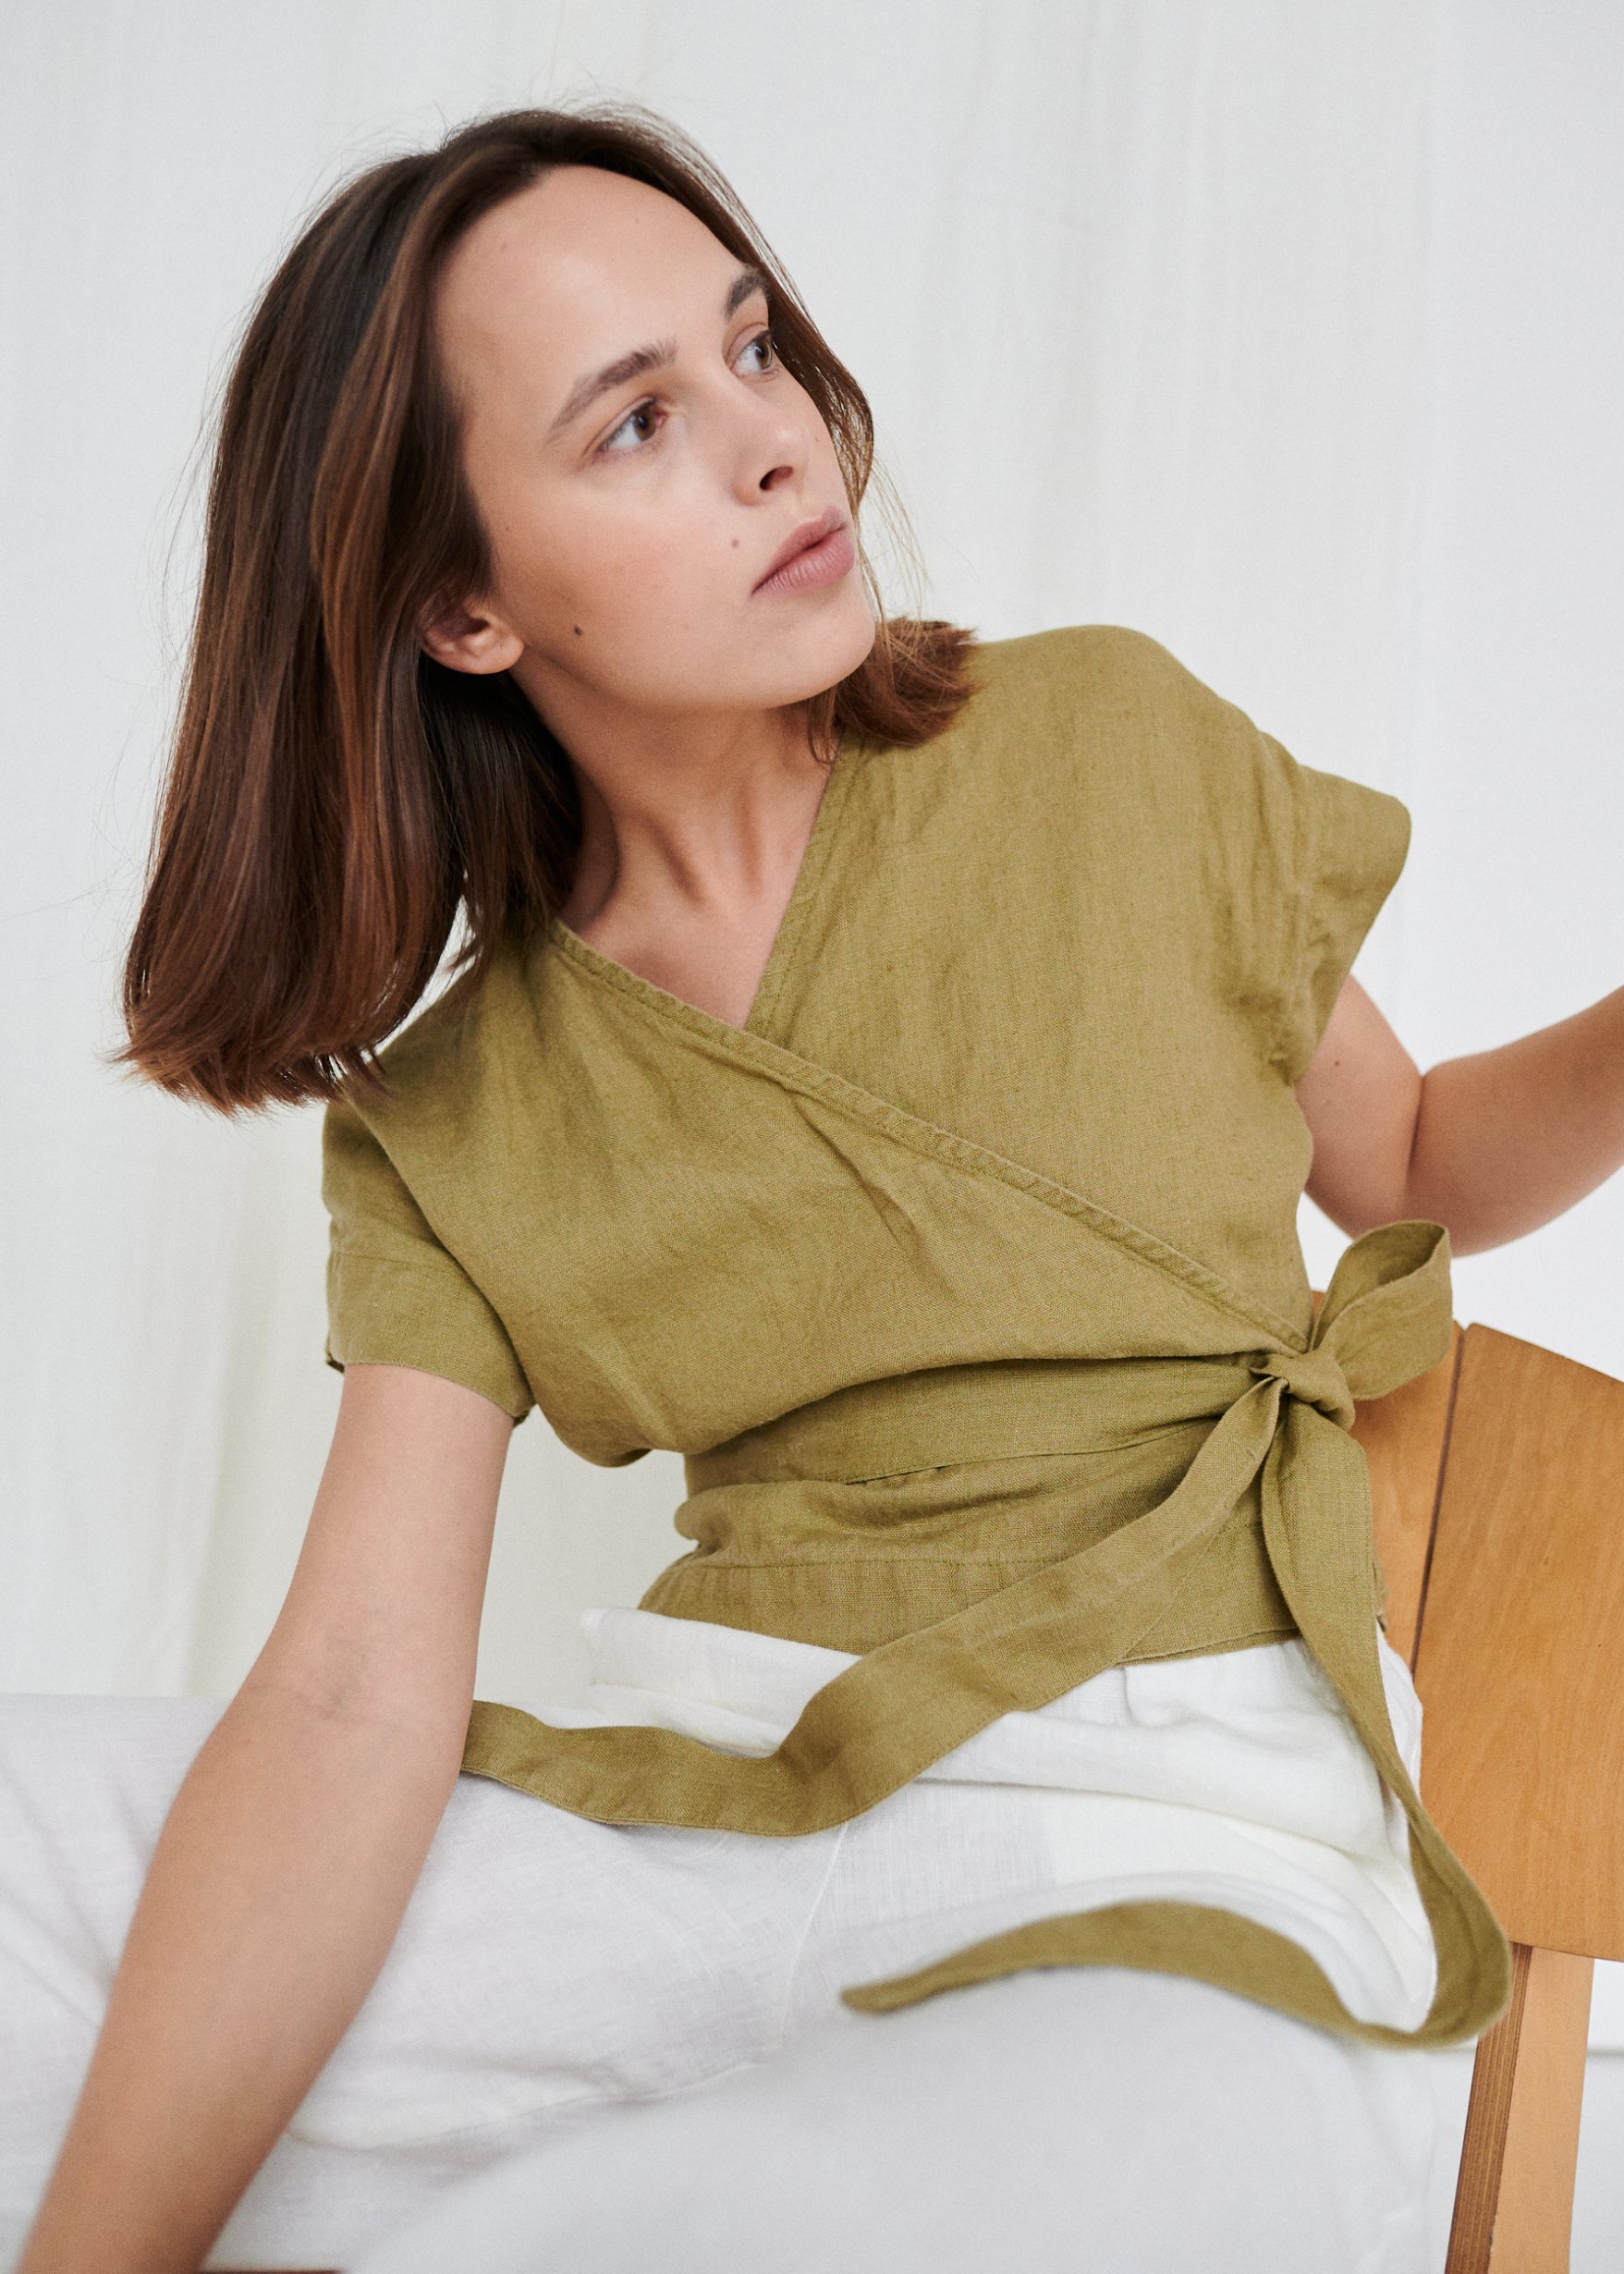 Maternity friendly top made of linen